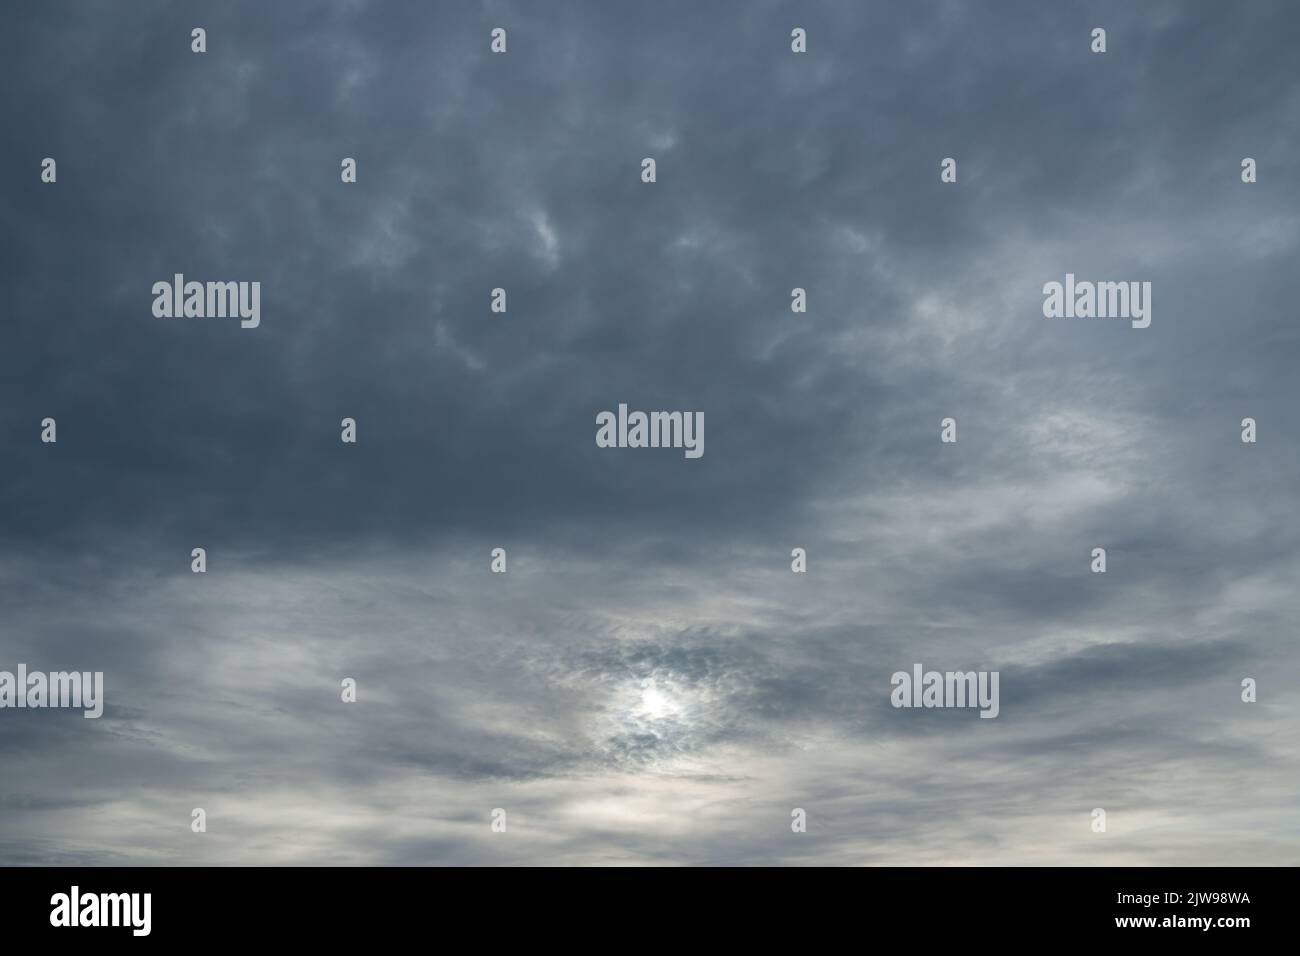 Photo of sun through stormy clouds. Stock Photo